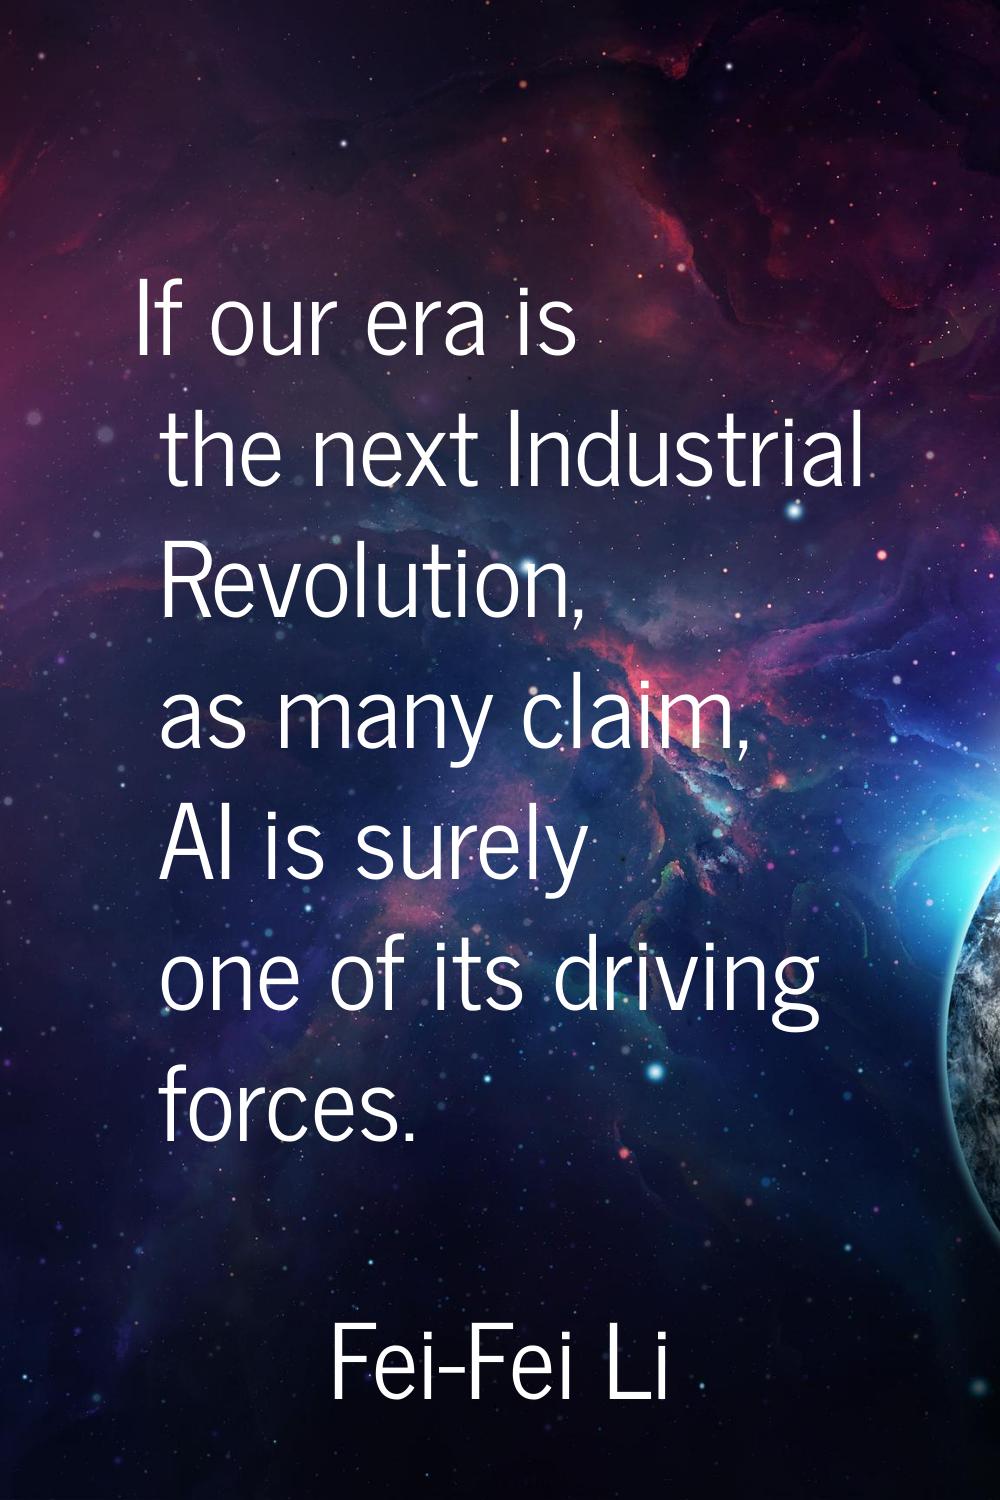 If our era is the next Industrial Revolution, as many claim, AI is surely one of its driving forces